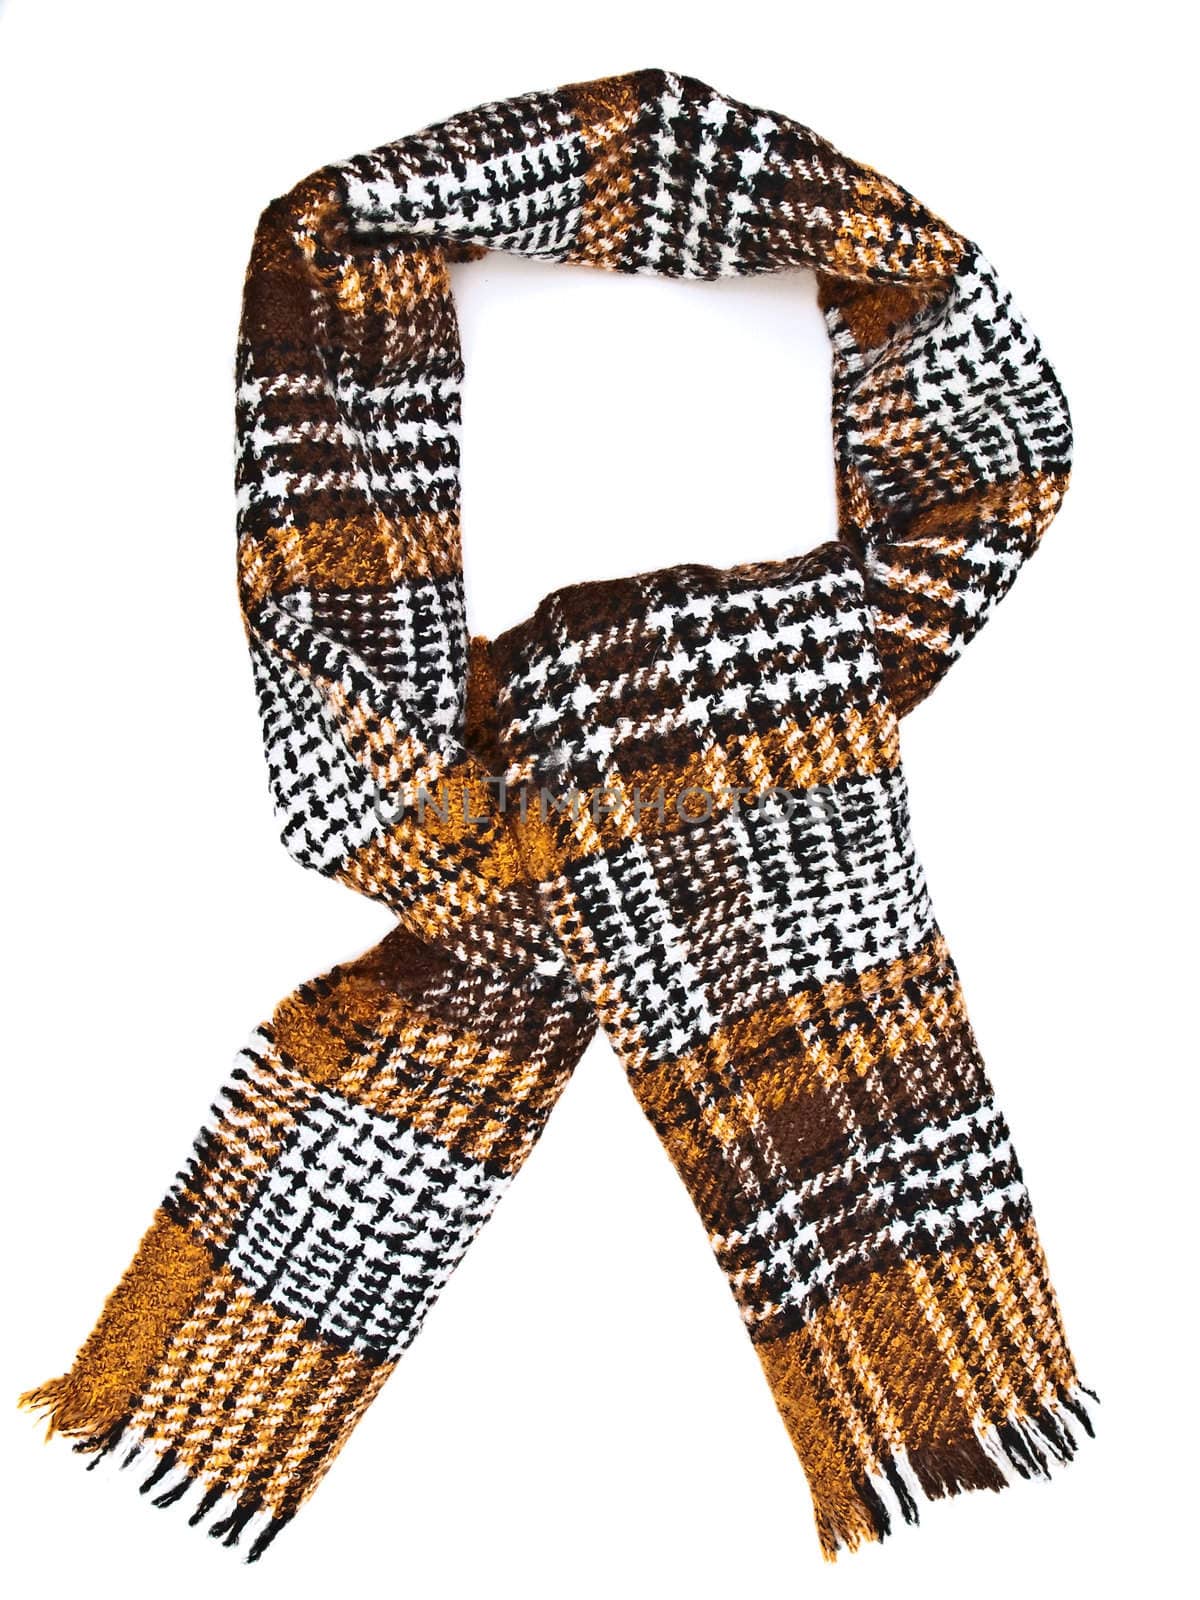 Single scarf against the white background